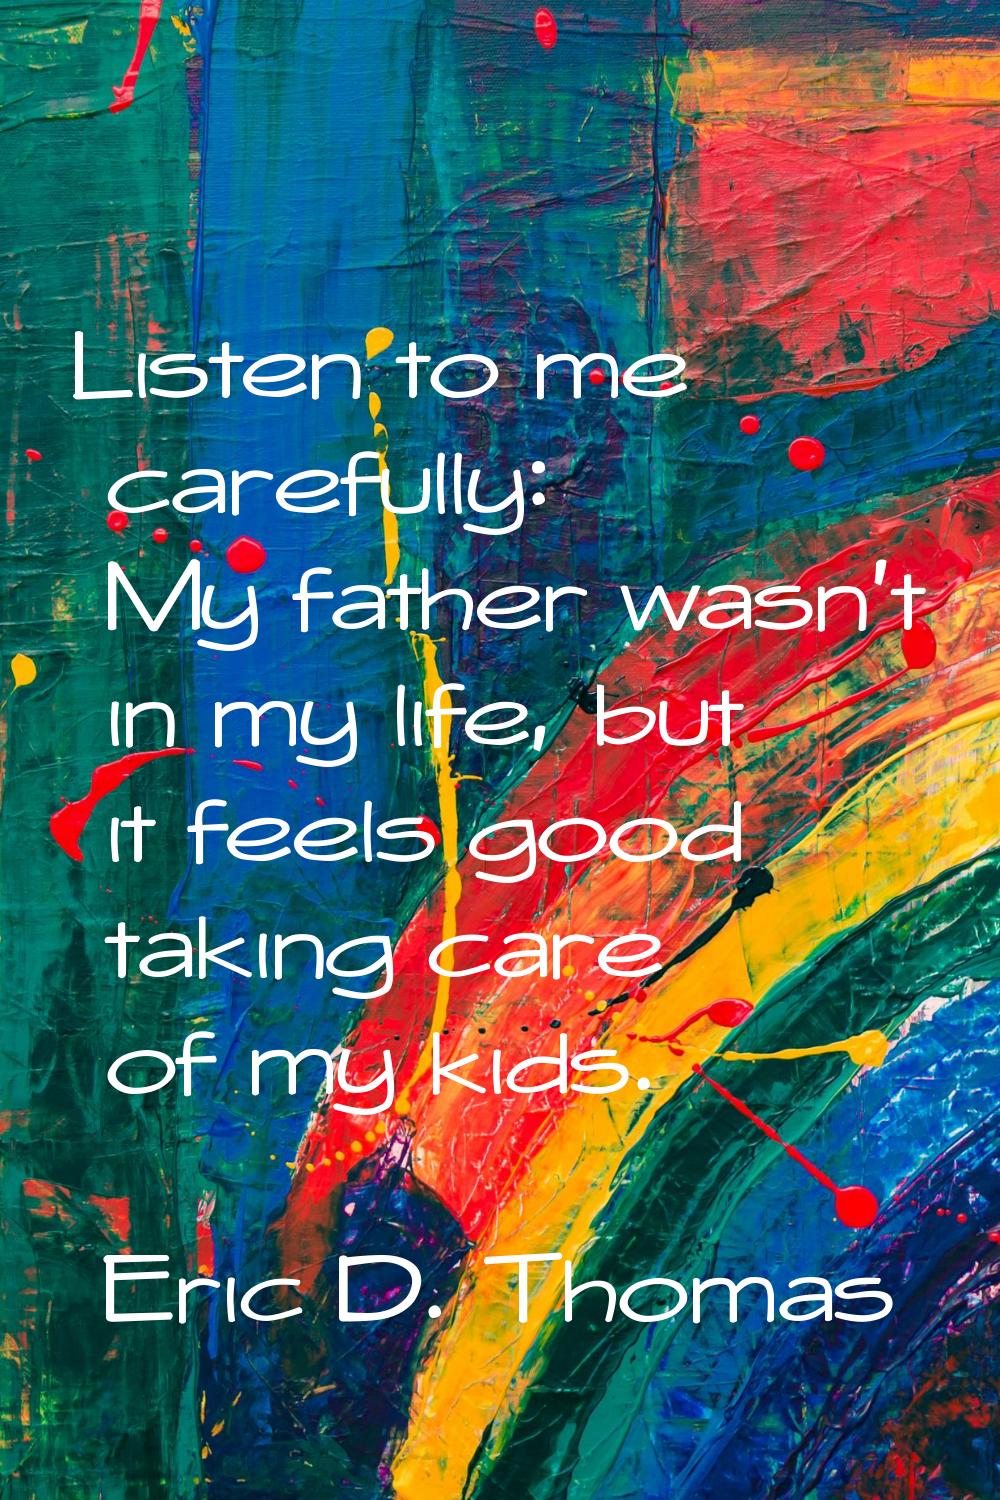 Listen to me carefully: My father wasn't in my life, but it feels good taking care of my kids.